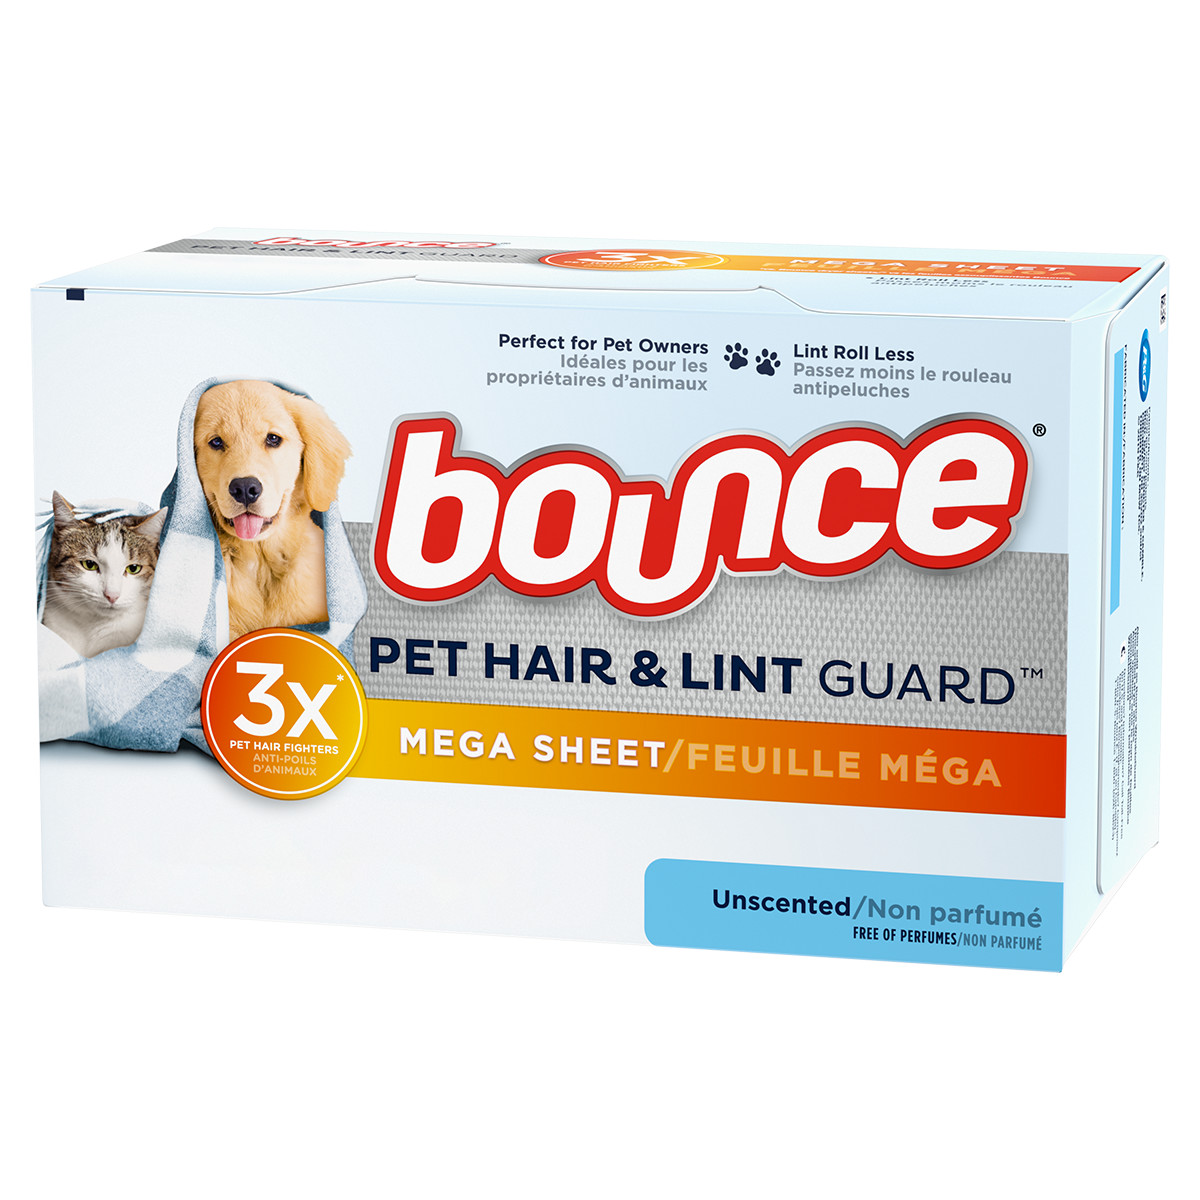 Bounce Pet Hair and Lint Guard Mega Dryer Sheets with 3X Pet Hair Fighters, Unscented